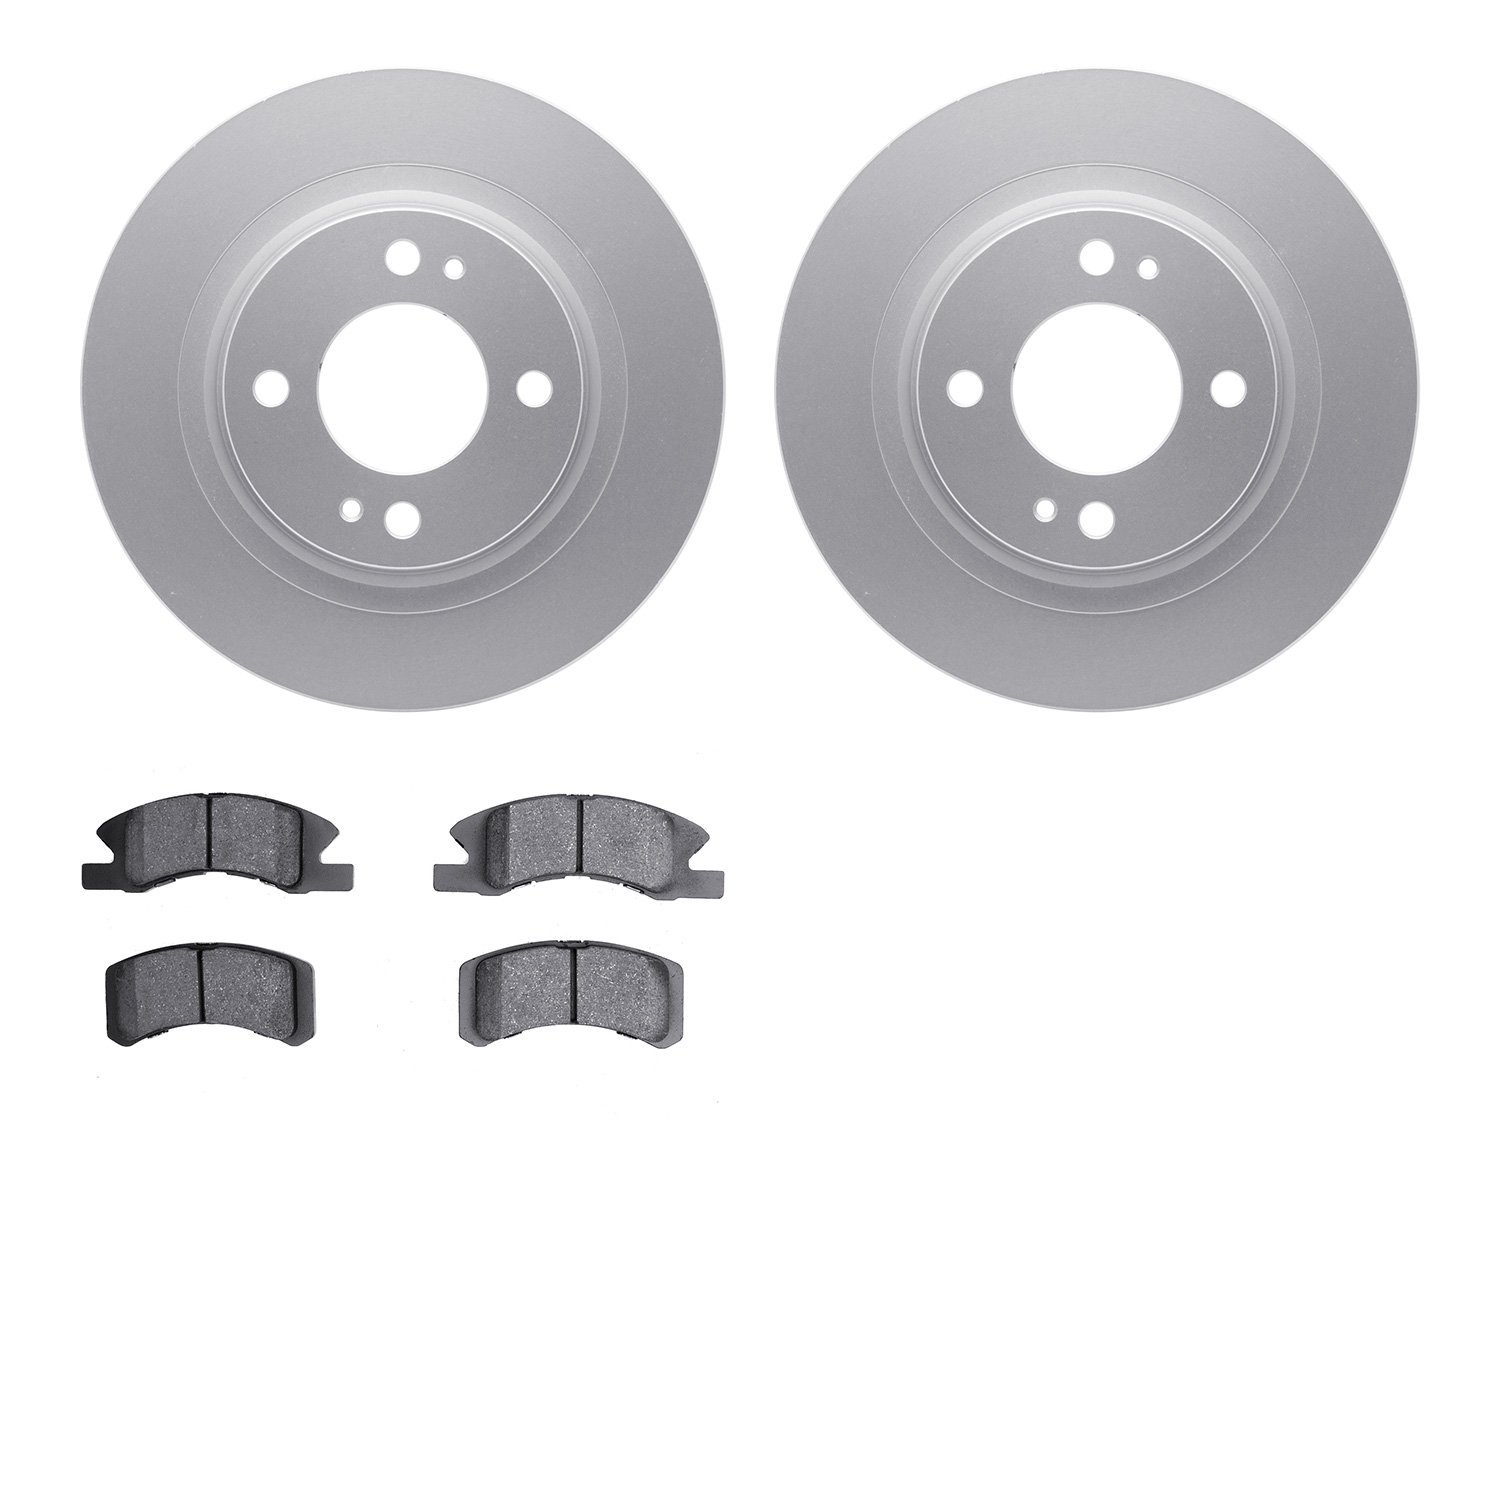 4302-72033 Geospec Brake Rotors with 3000-Series Ceramic Brake Pads Kit, Fits Select Multiple Makes/Models, Position: Front